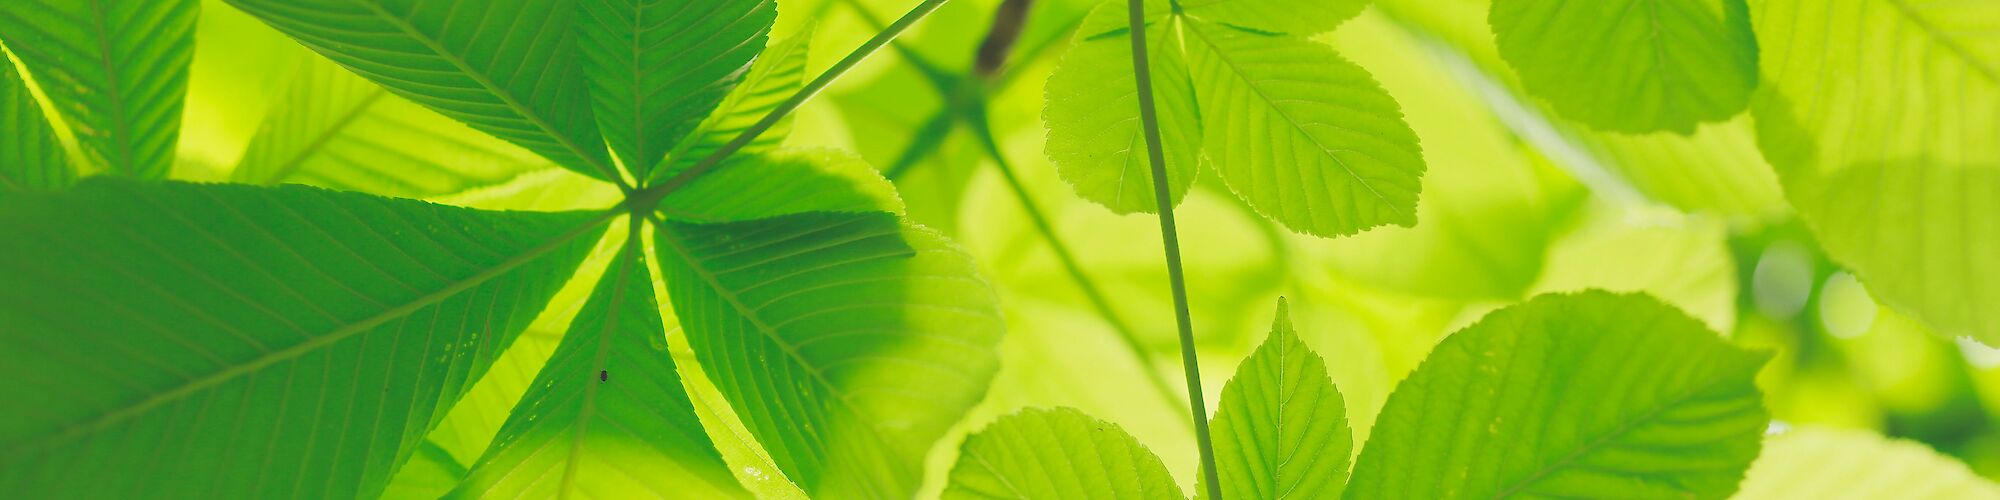 The image shows a close-up view of green leaves with distinct veins, bathed in sunlight. The leaves appear fresh and vibrant.